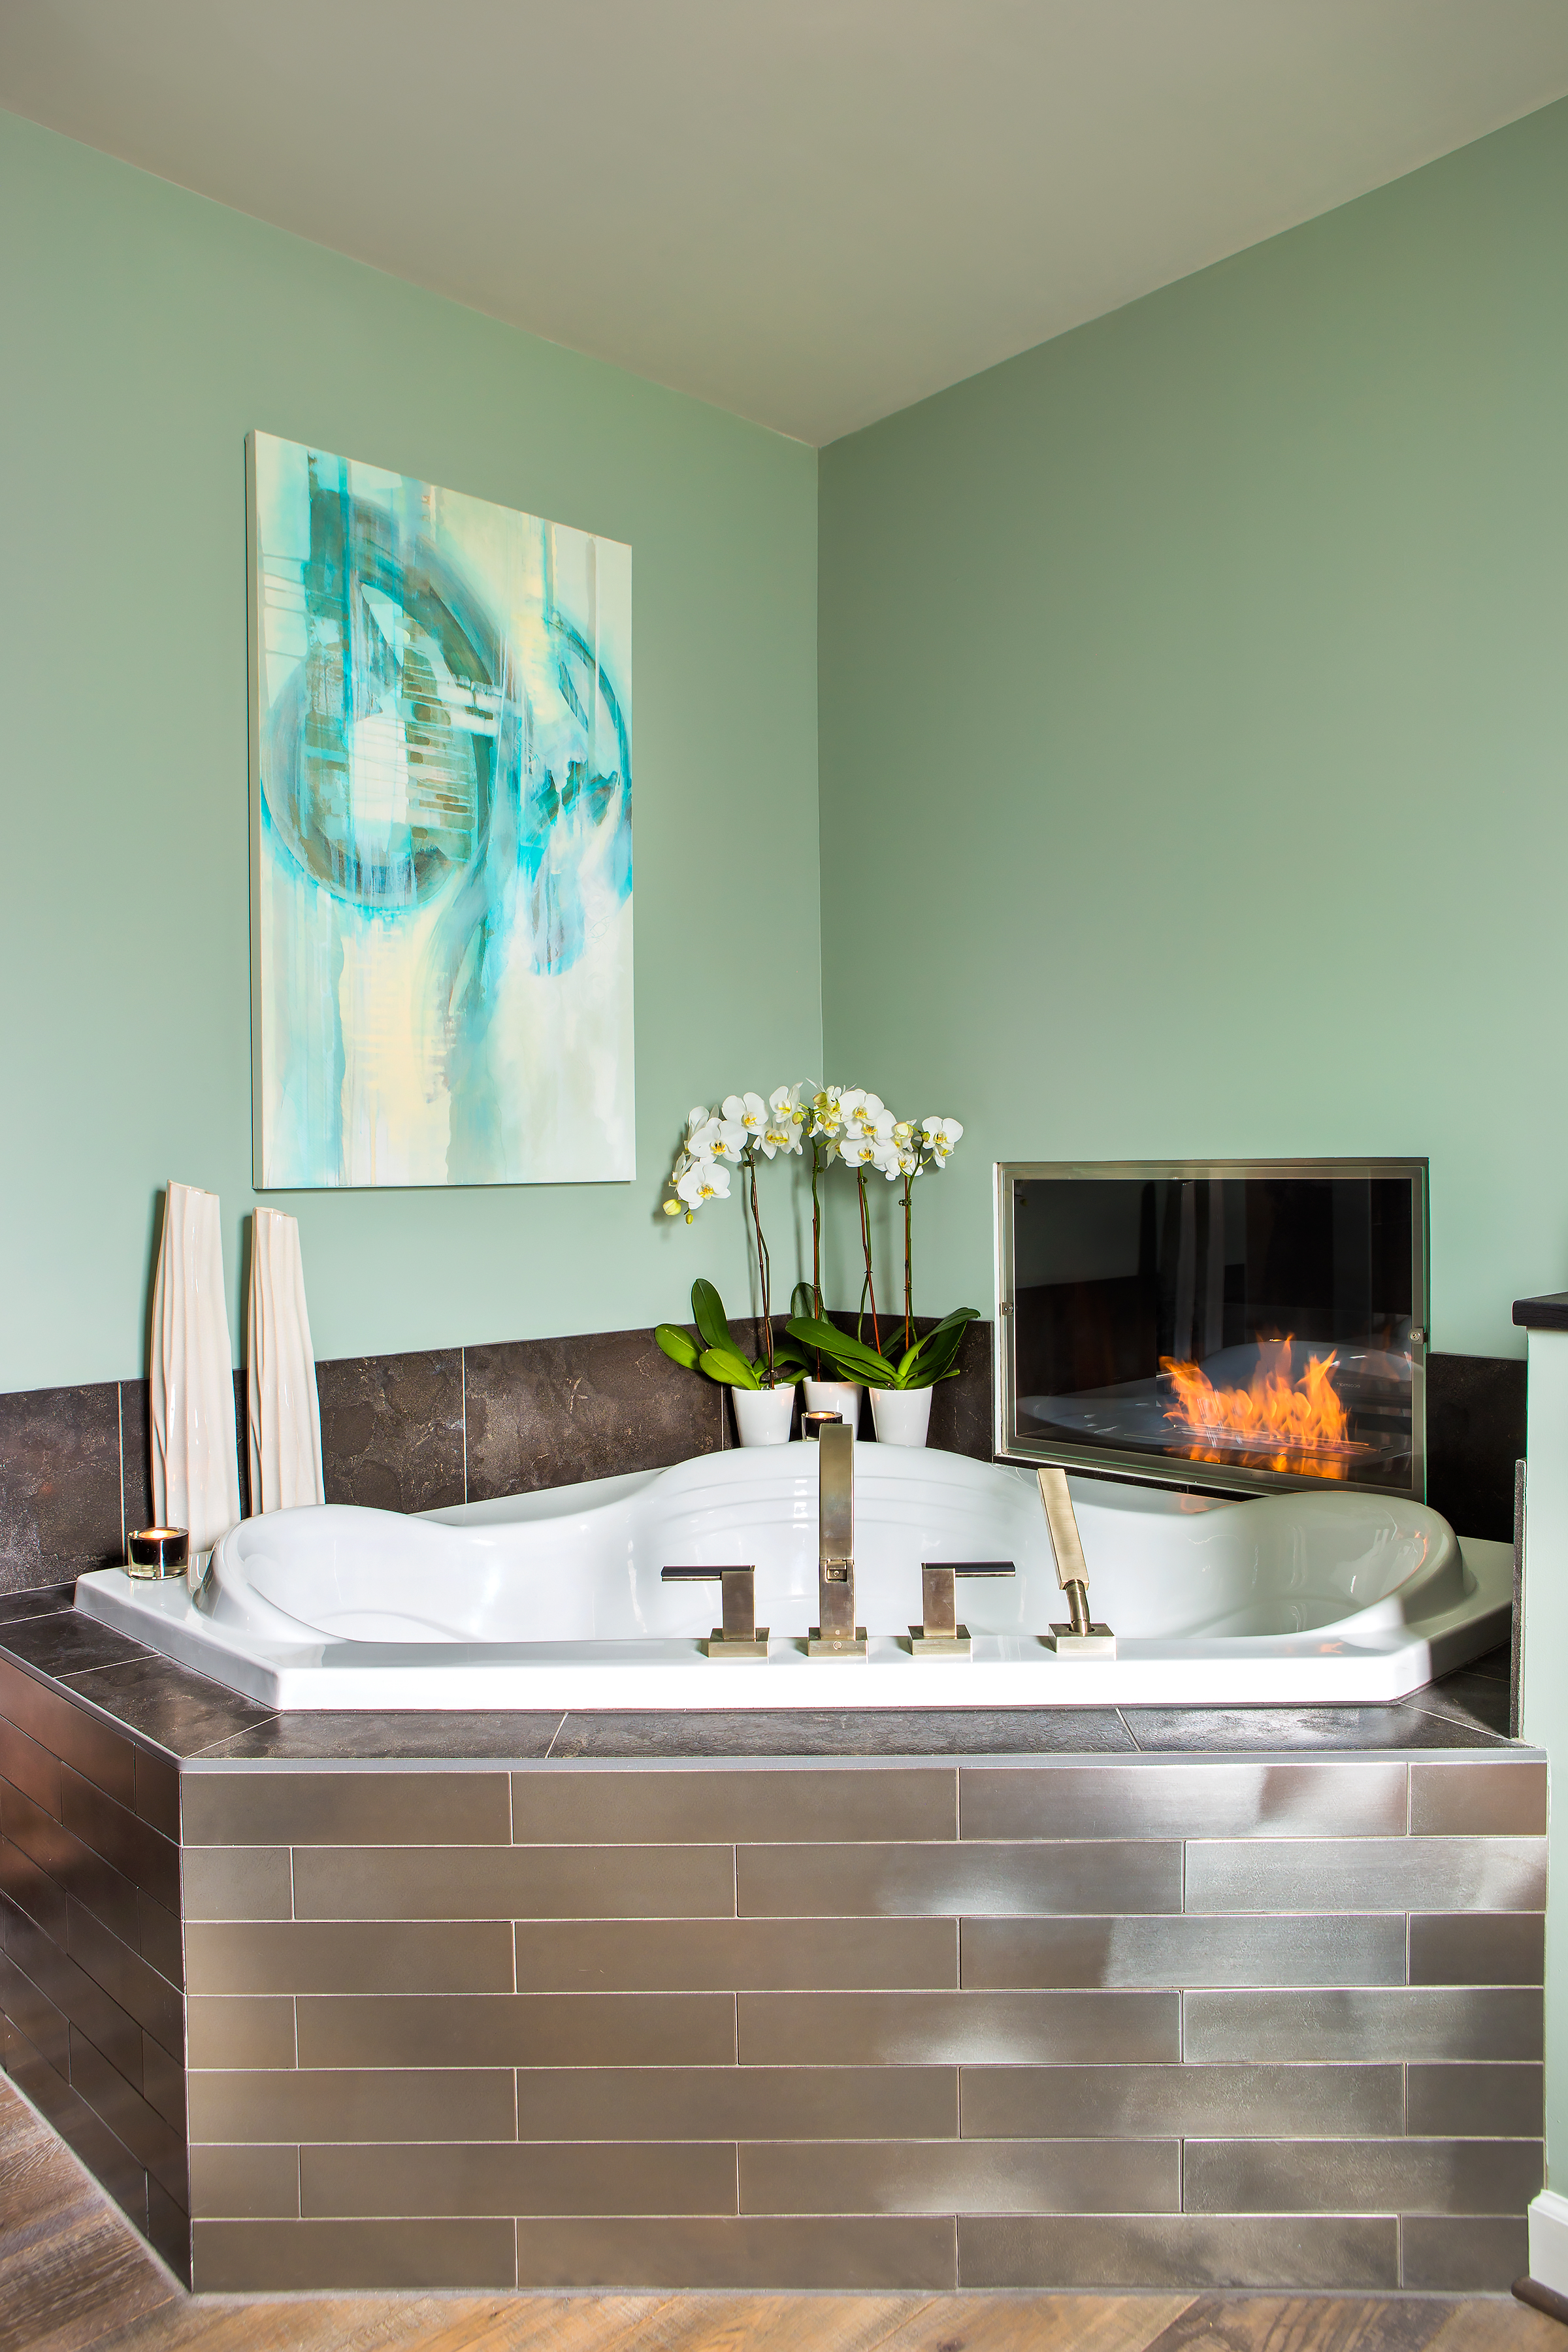 The gracious master bath tub shares a two-sided alcohol flame fireplace with the master bedroom. Dark gray ceramic and metallic tiles are from Palmetto Tile. The beautiful orchids are courtesy of The Fresh Market.